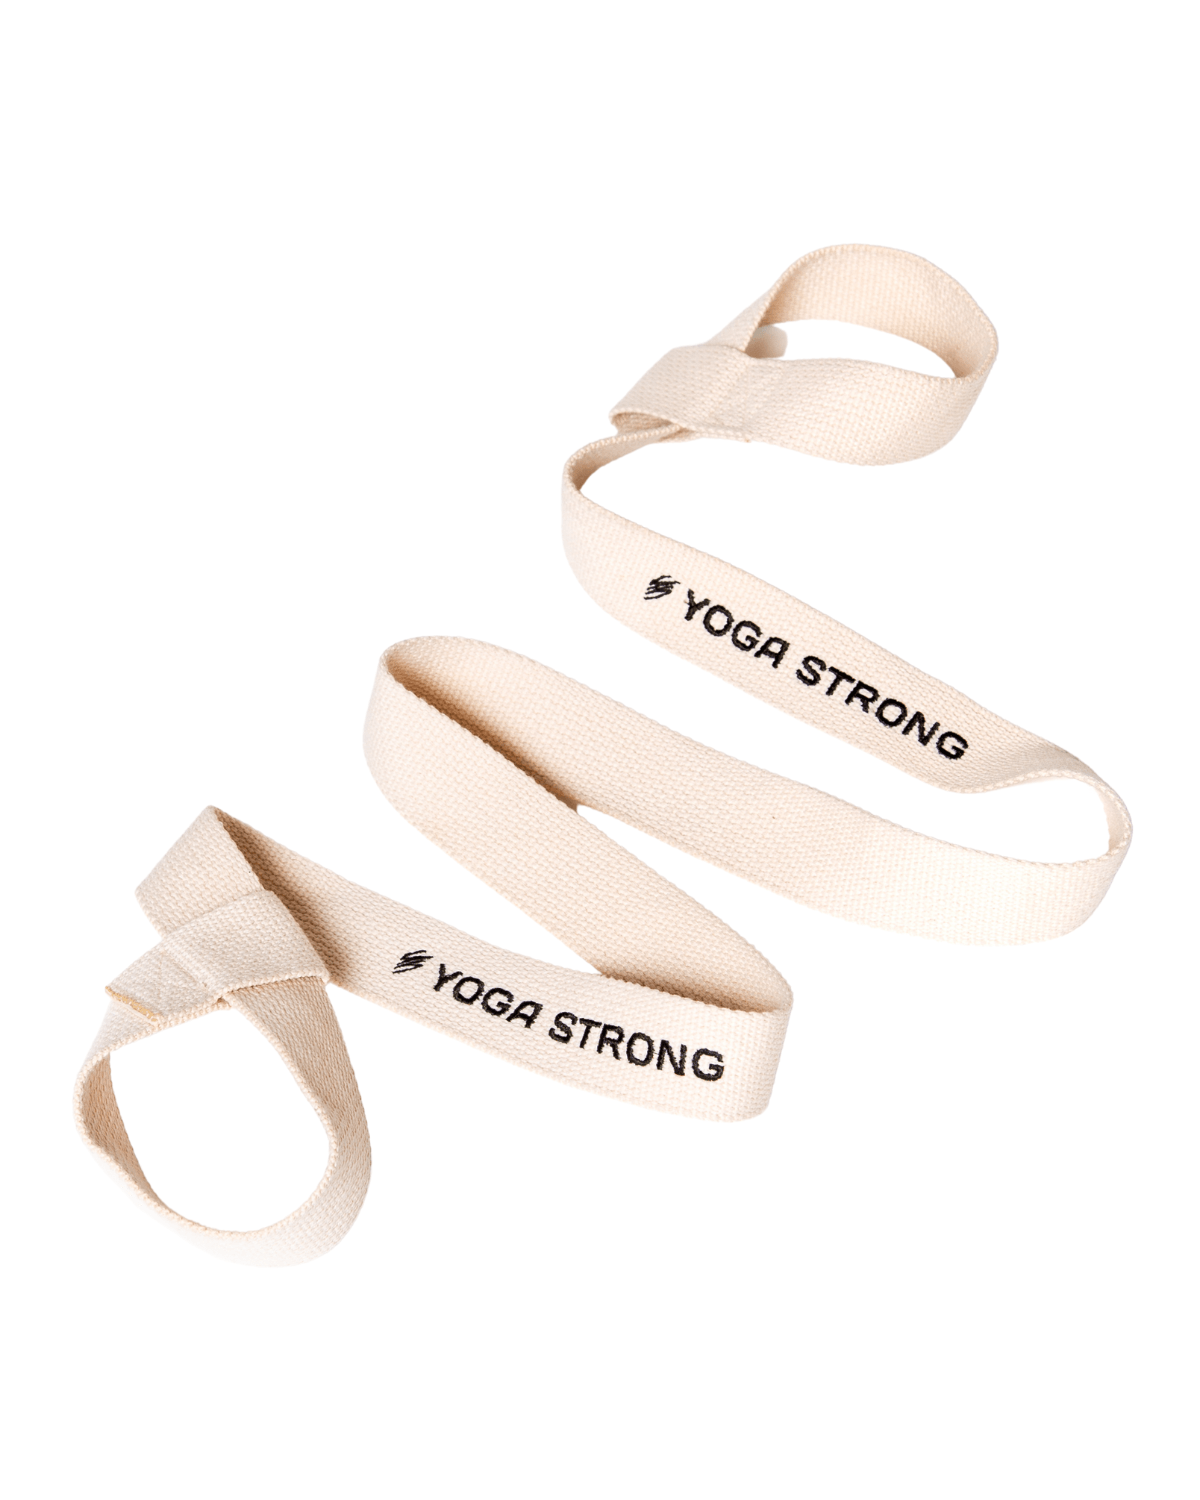 The Strap, Ivory - Yoga Strong